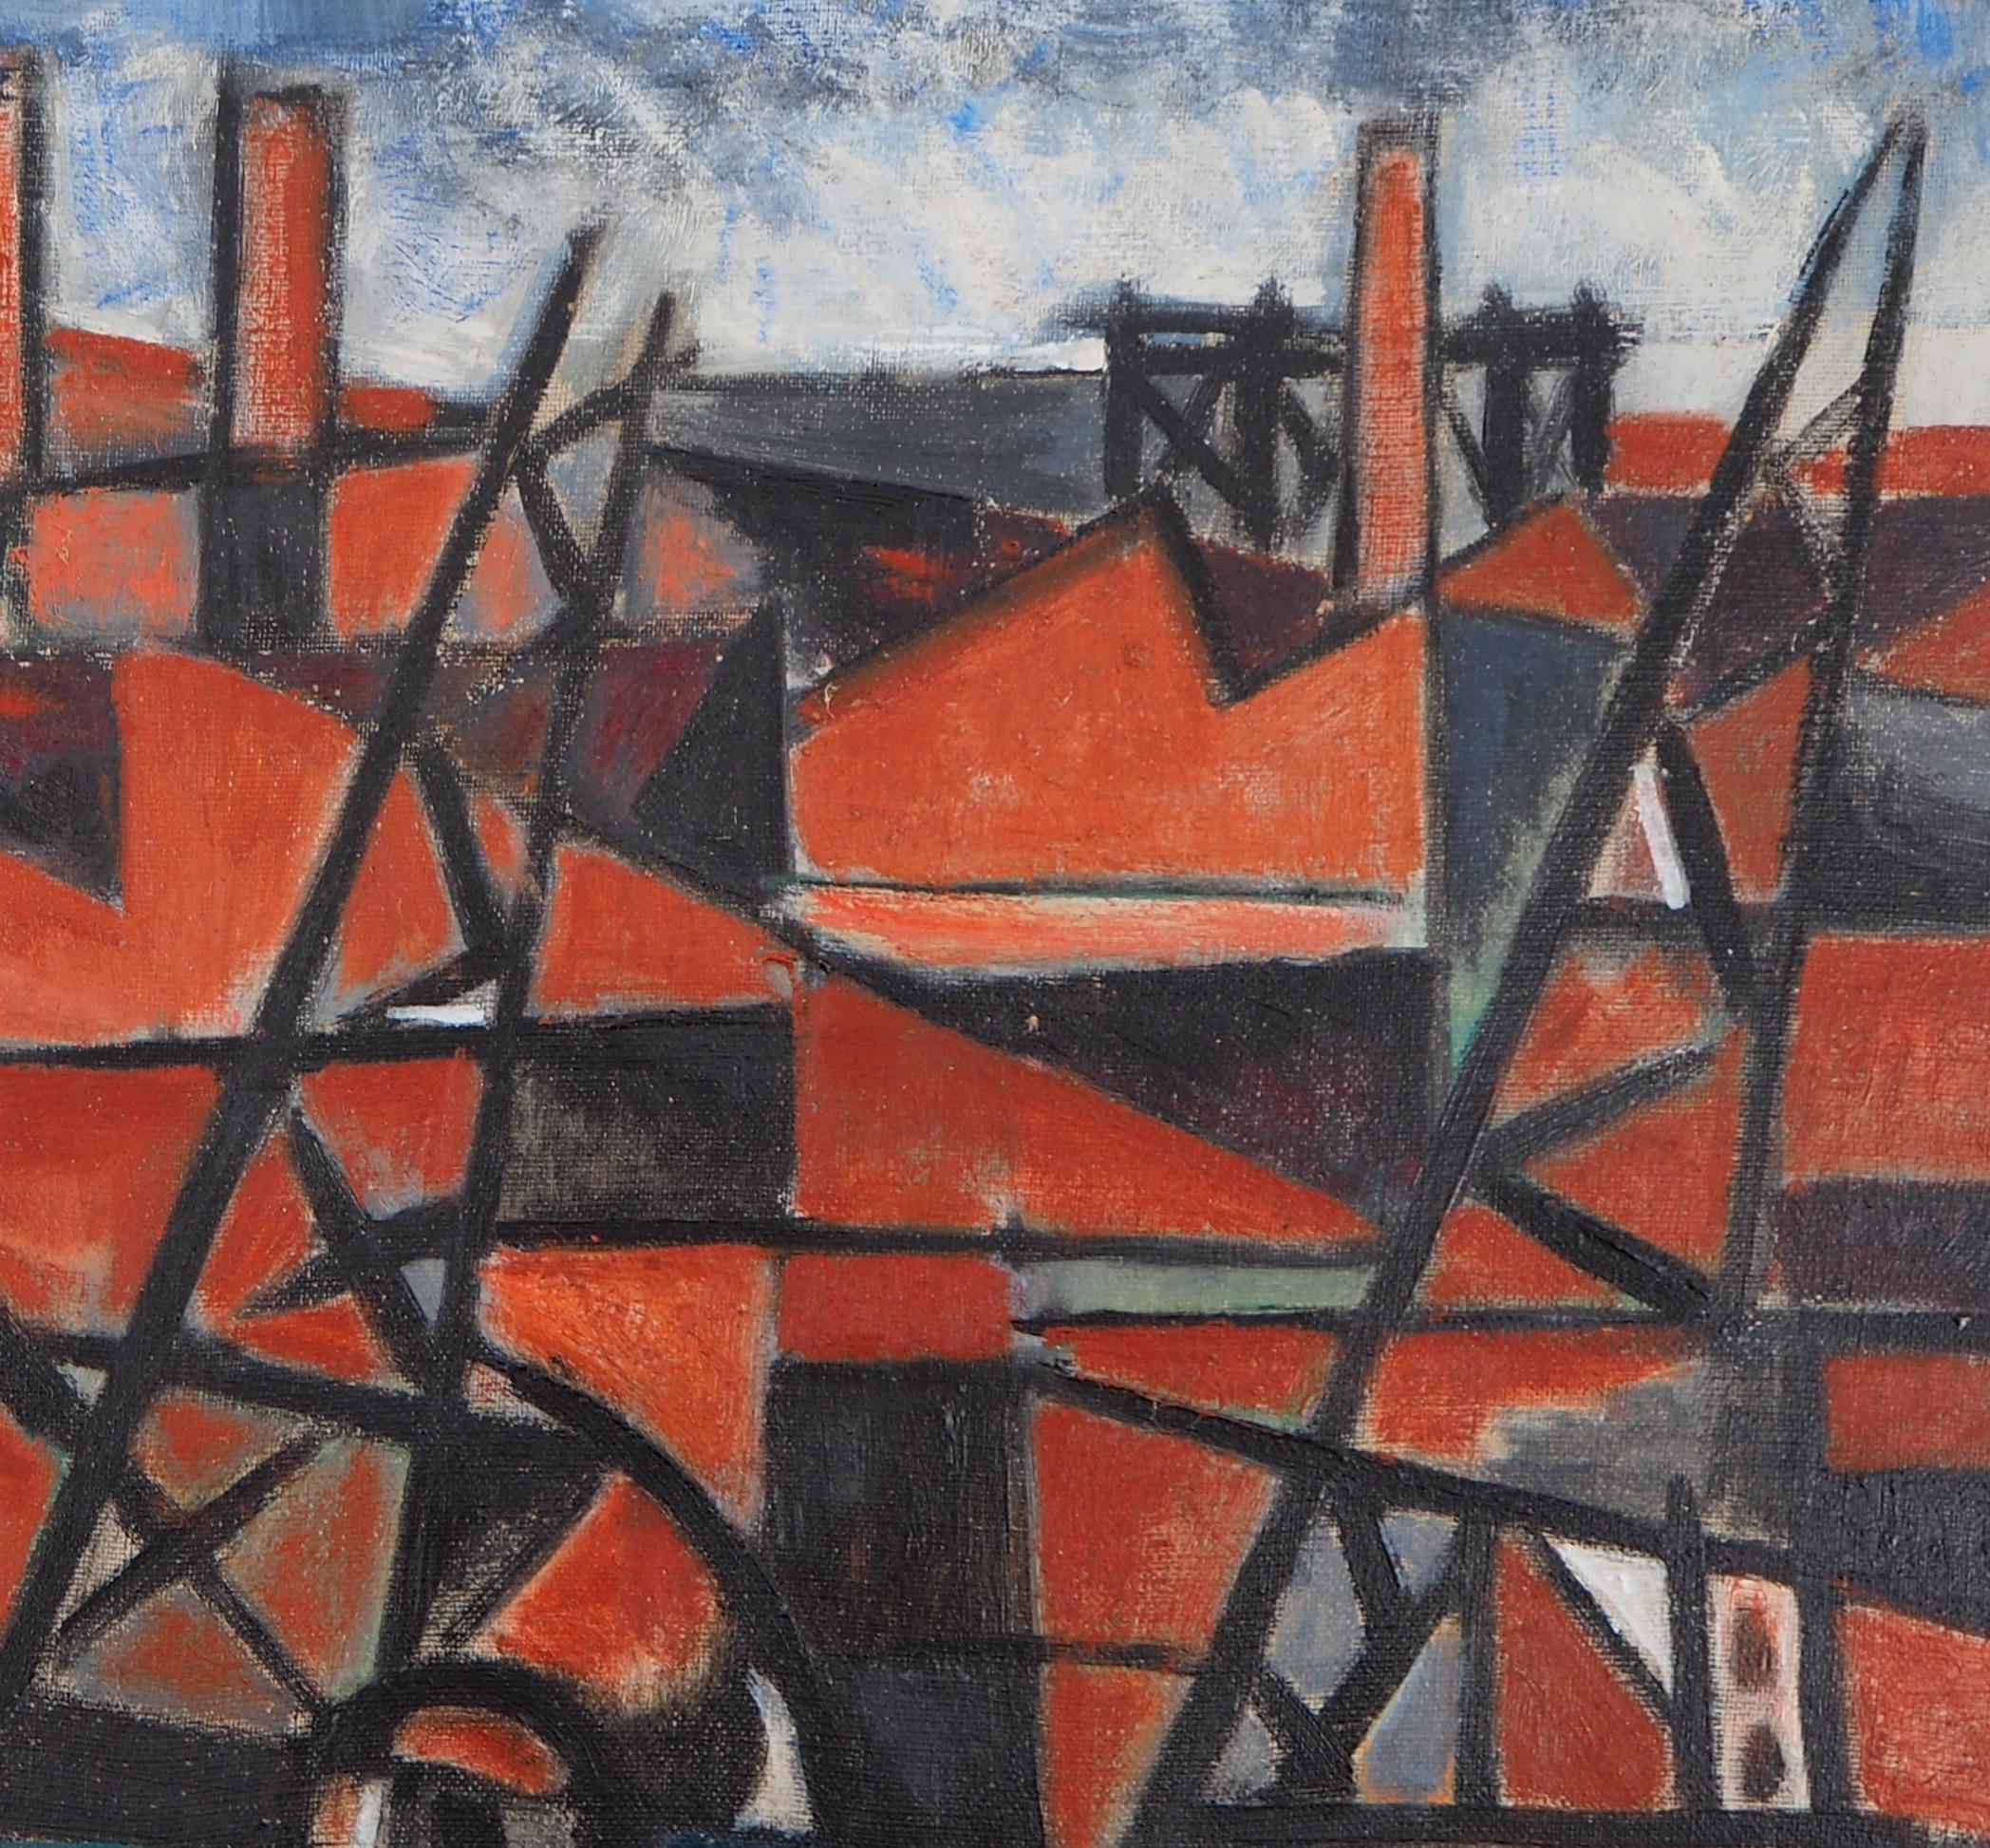 Harbor and Red Buildings - Original Oil on canvas, Signed - Modern Painting by Lino MELANO